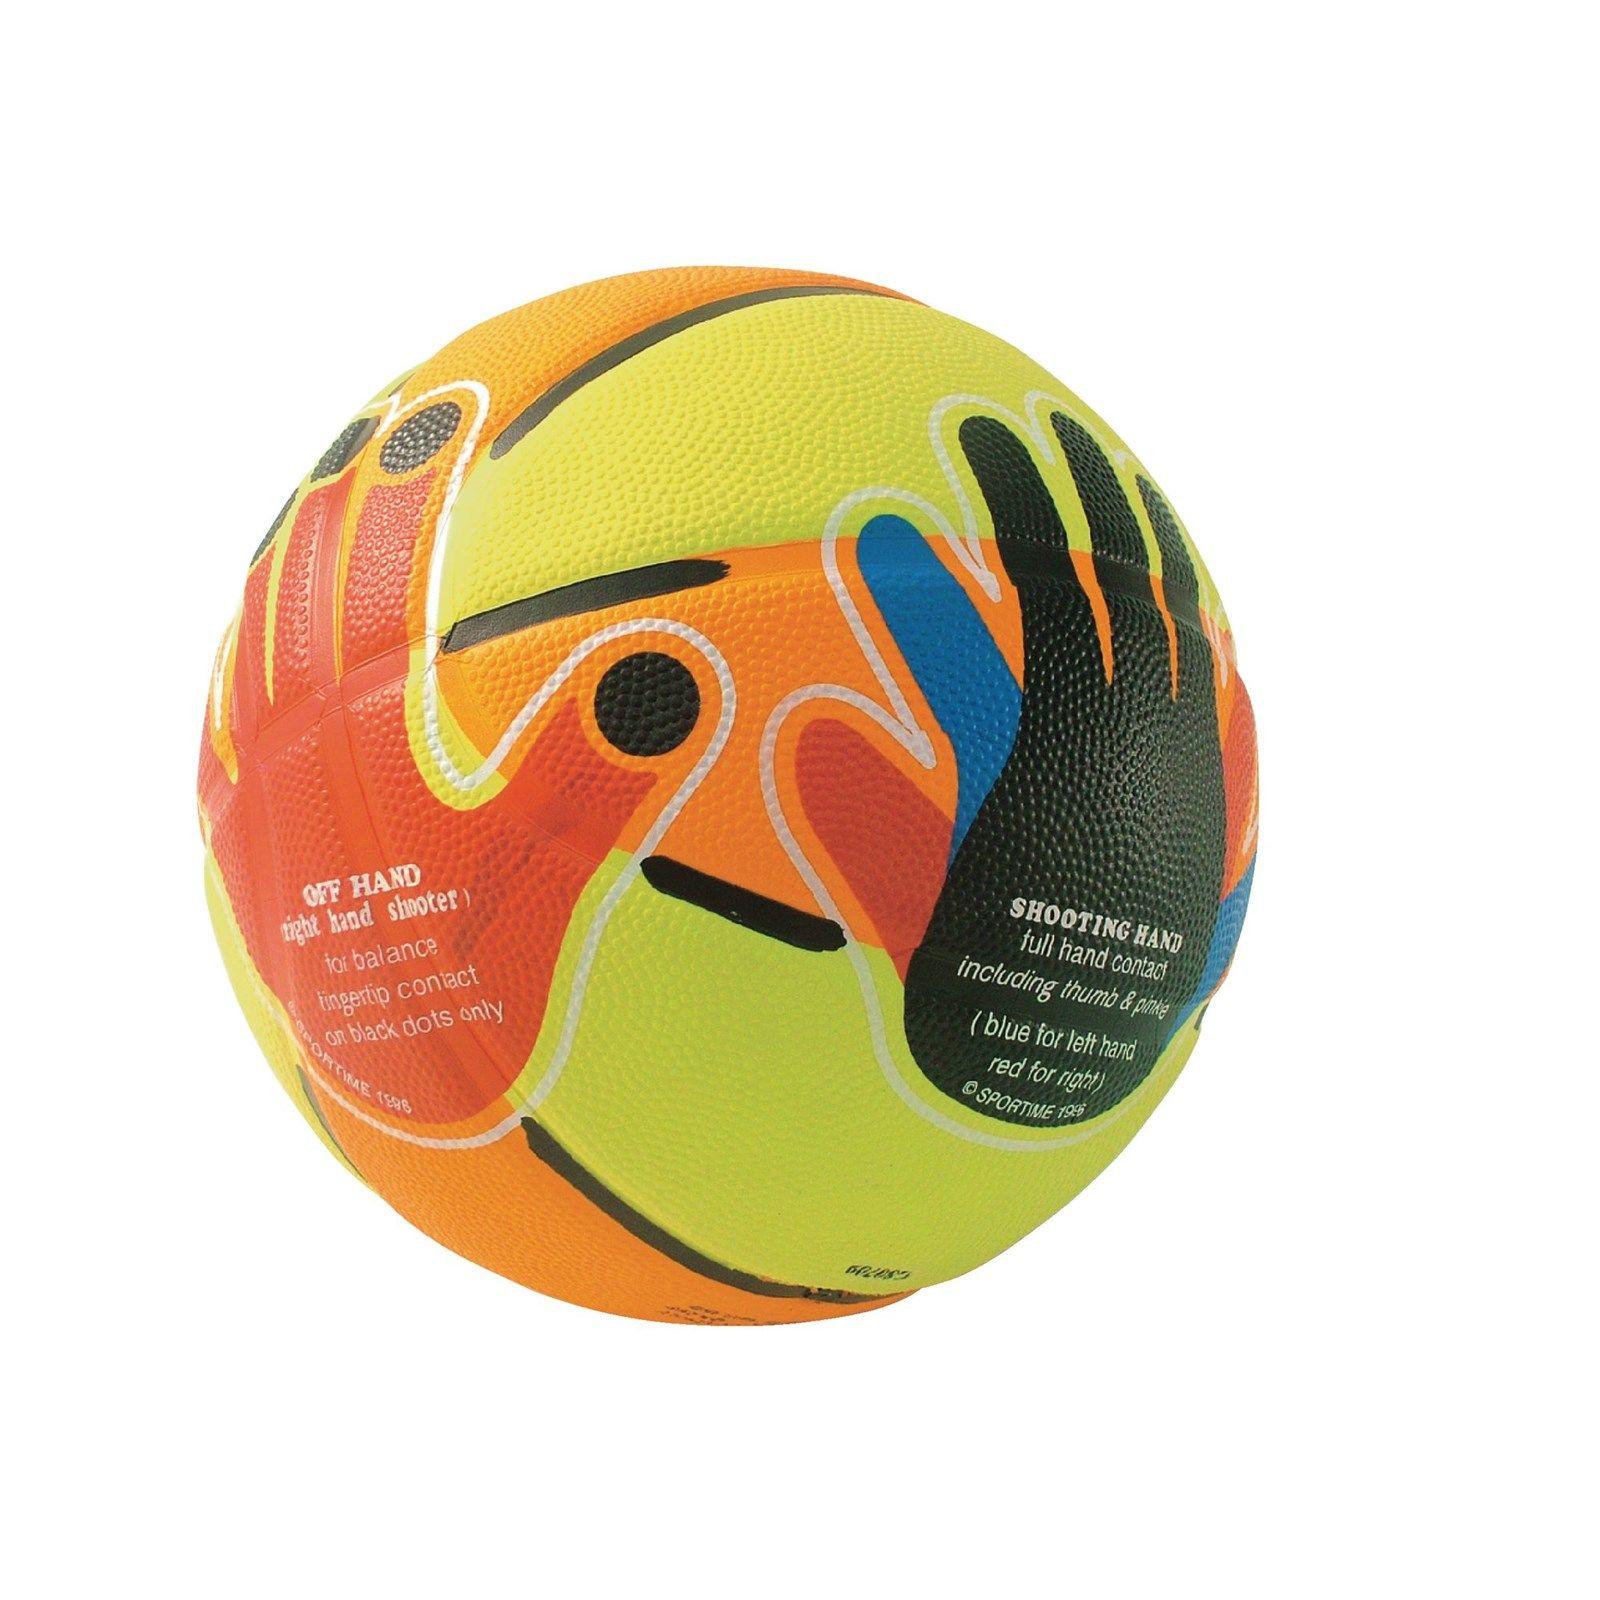 Basketball with Hands Logo - Hands-On Basketball™ - Size 6 | Hope Education